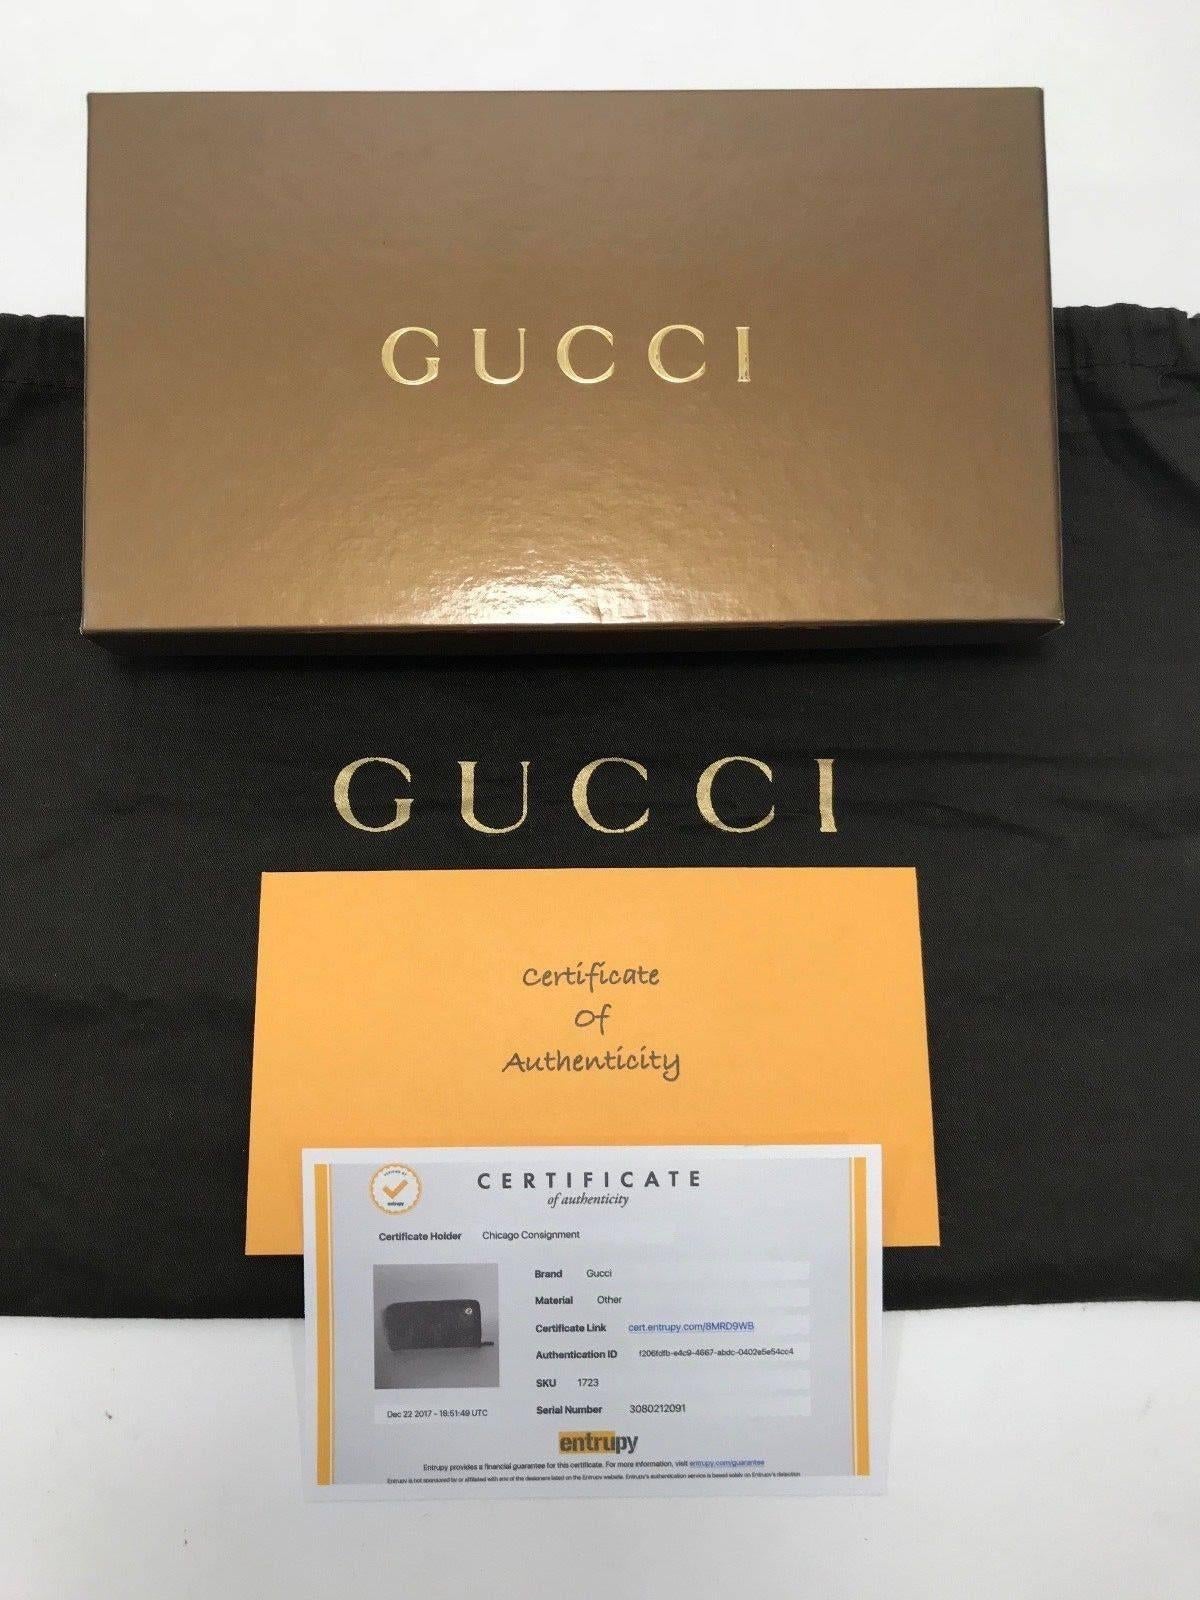 MODEL - Gucci Diamante Studded Zippy Wallet

CONDITION - Exceptional. Clean. No rips, holes, tears, stains or odors. Pieces maintains original shape without cracks or creases. Minor tarnishing on hardware but no chipping.

SKU - 1723

ORIGINAL